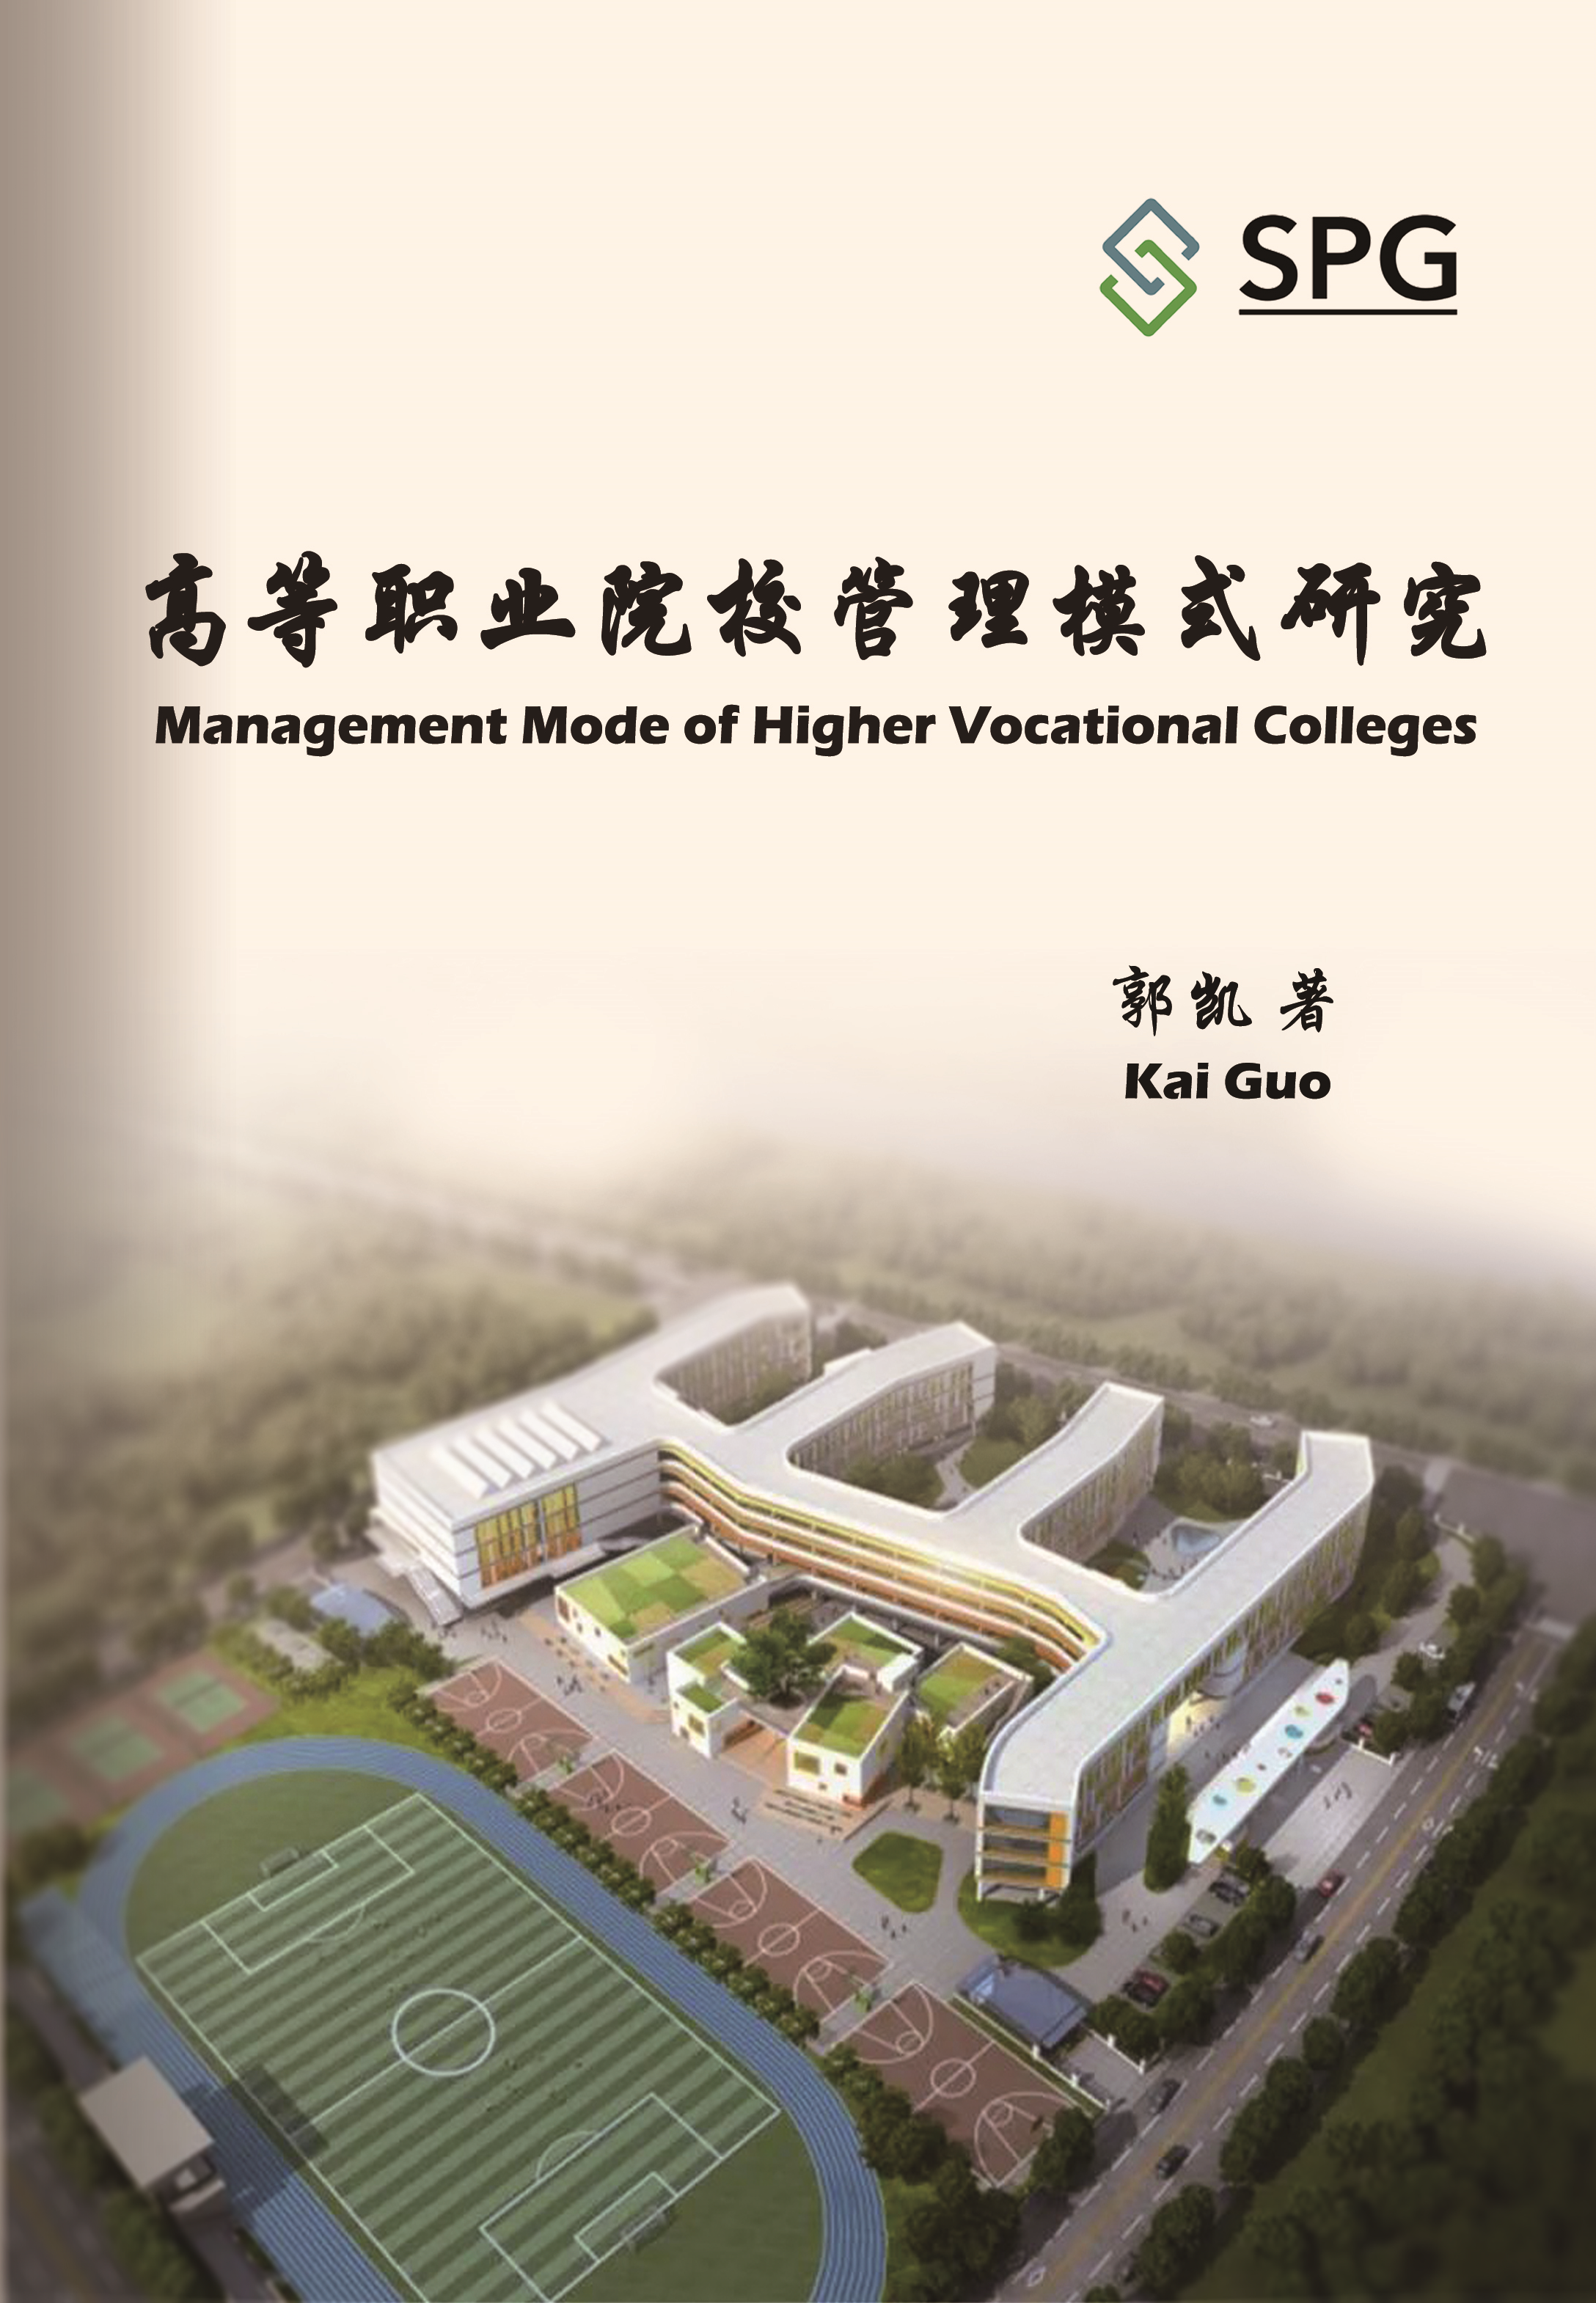 Management Mode of Higher Vocational Colleges | Scholar Publishing Group